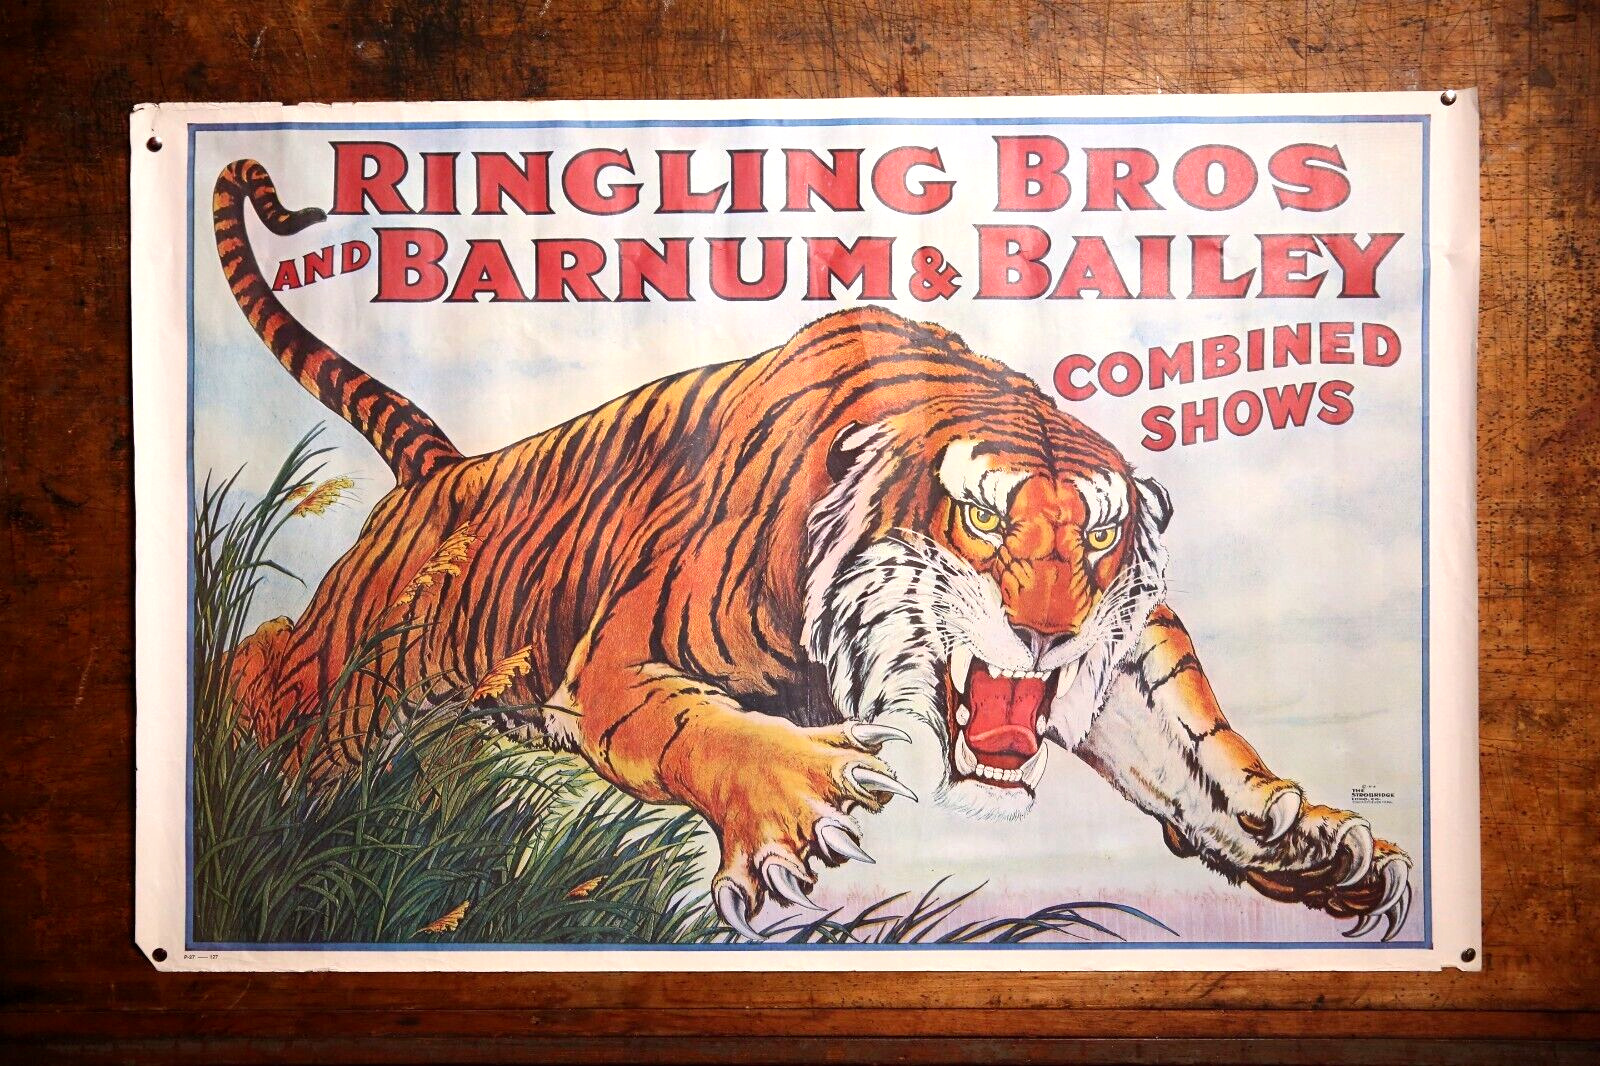 Vintage Ringling Brothers Barnum Bailey Circus Tiger Poster banner carnival show